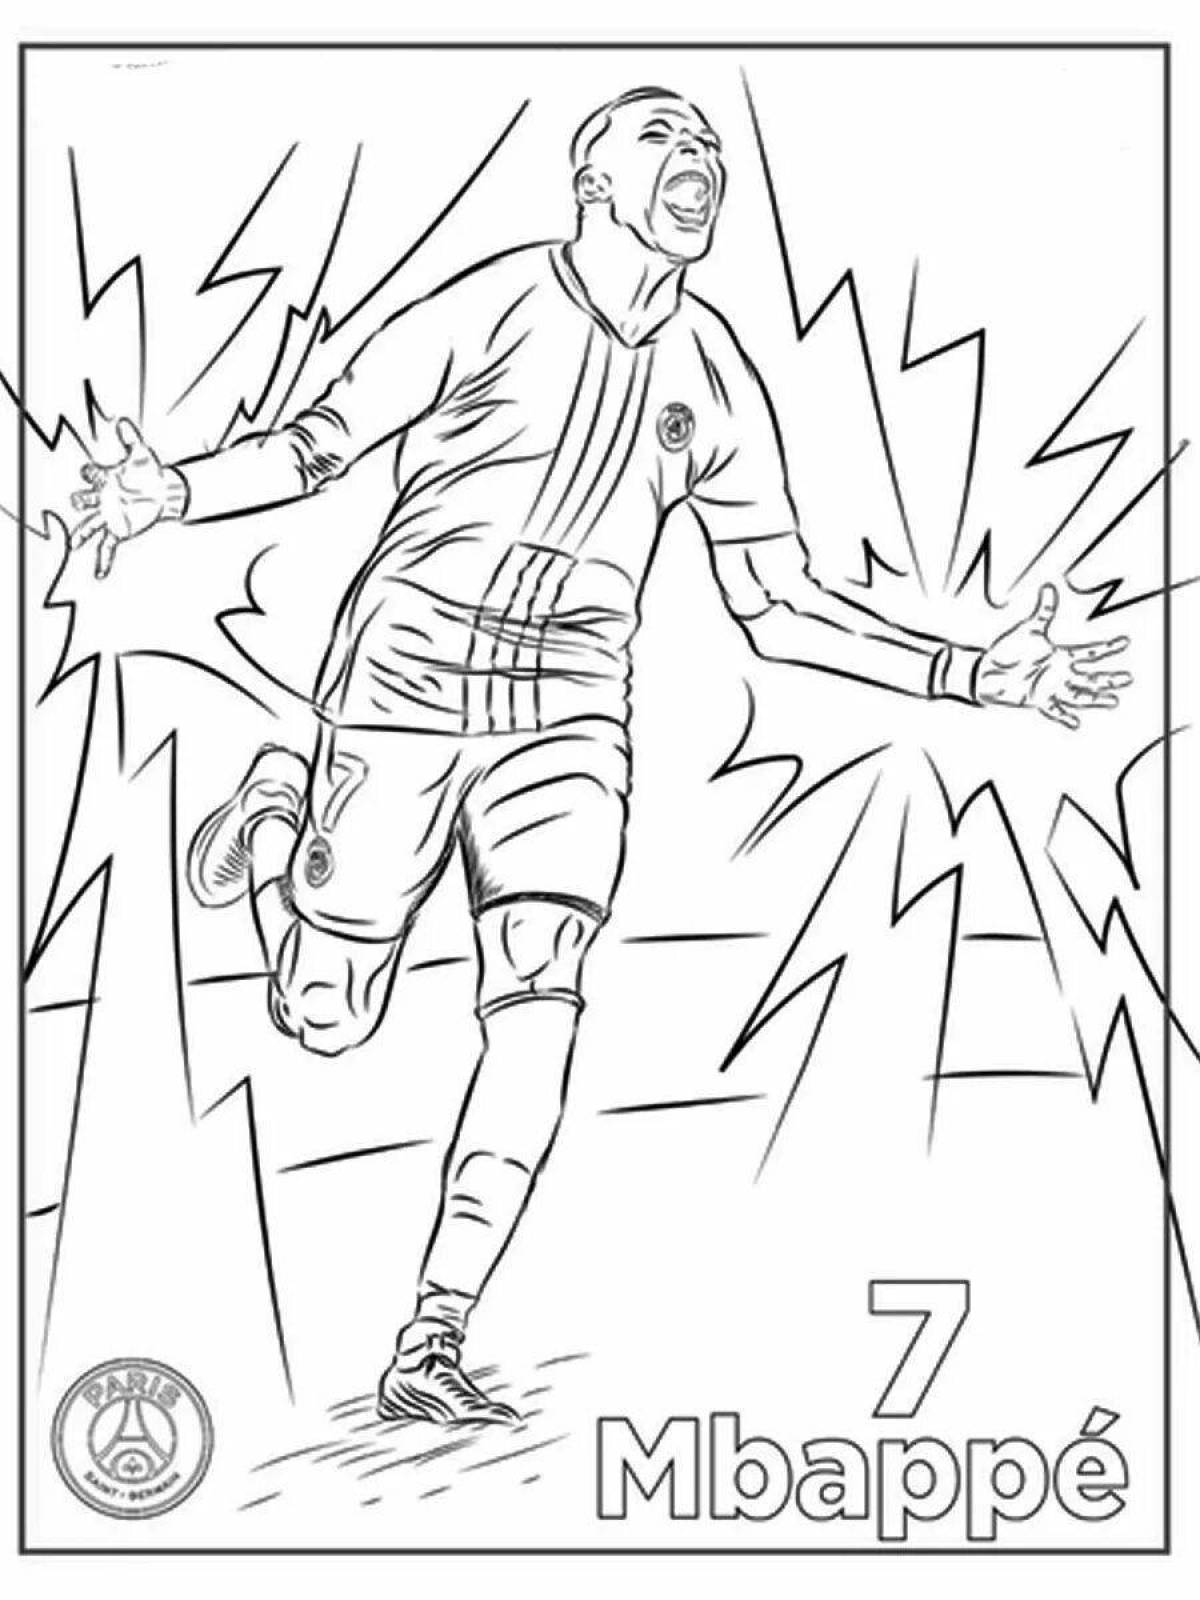 Majestic soccer player coloring page